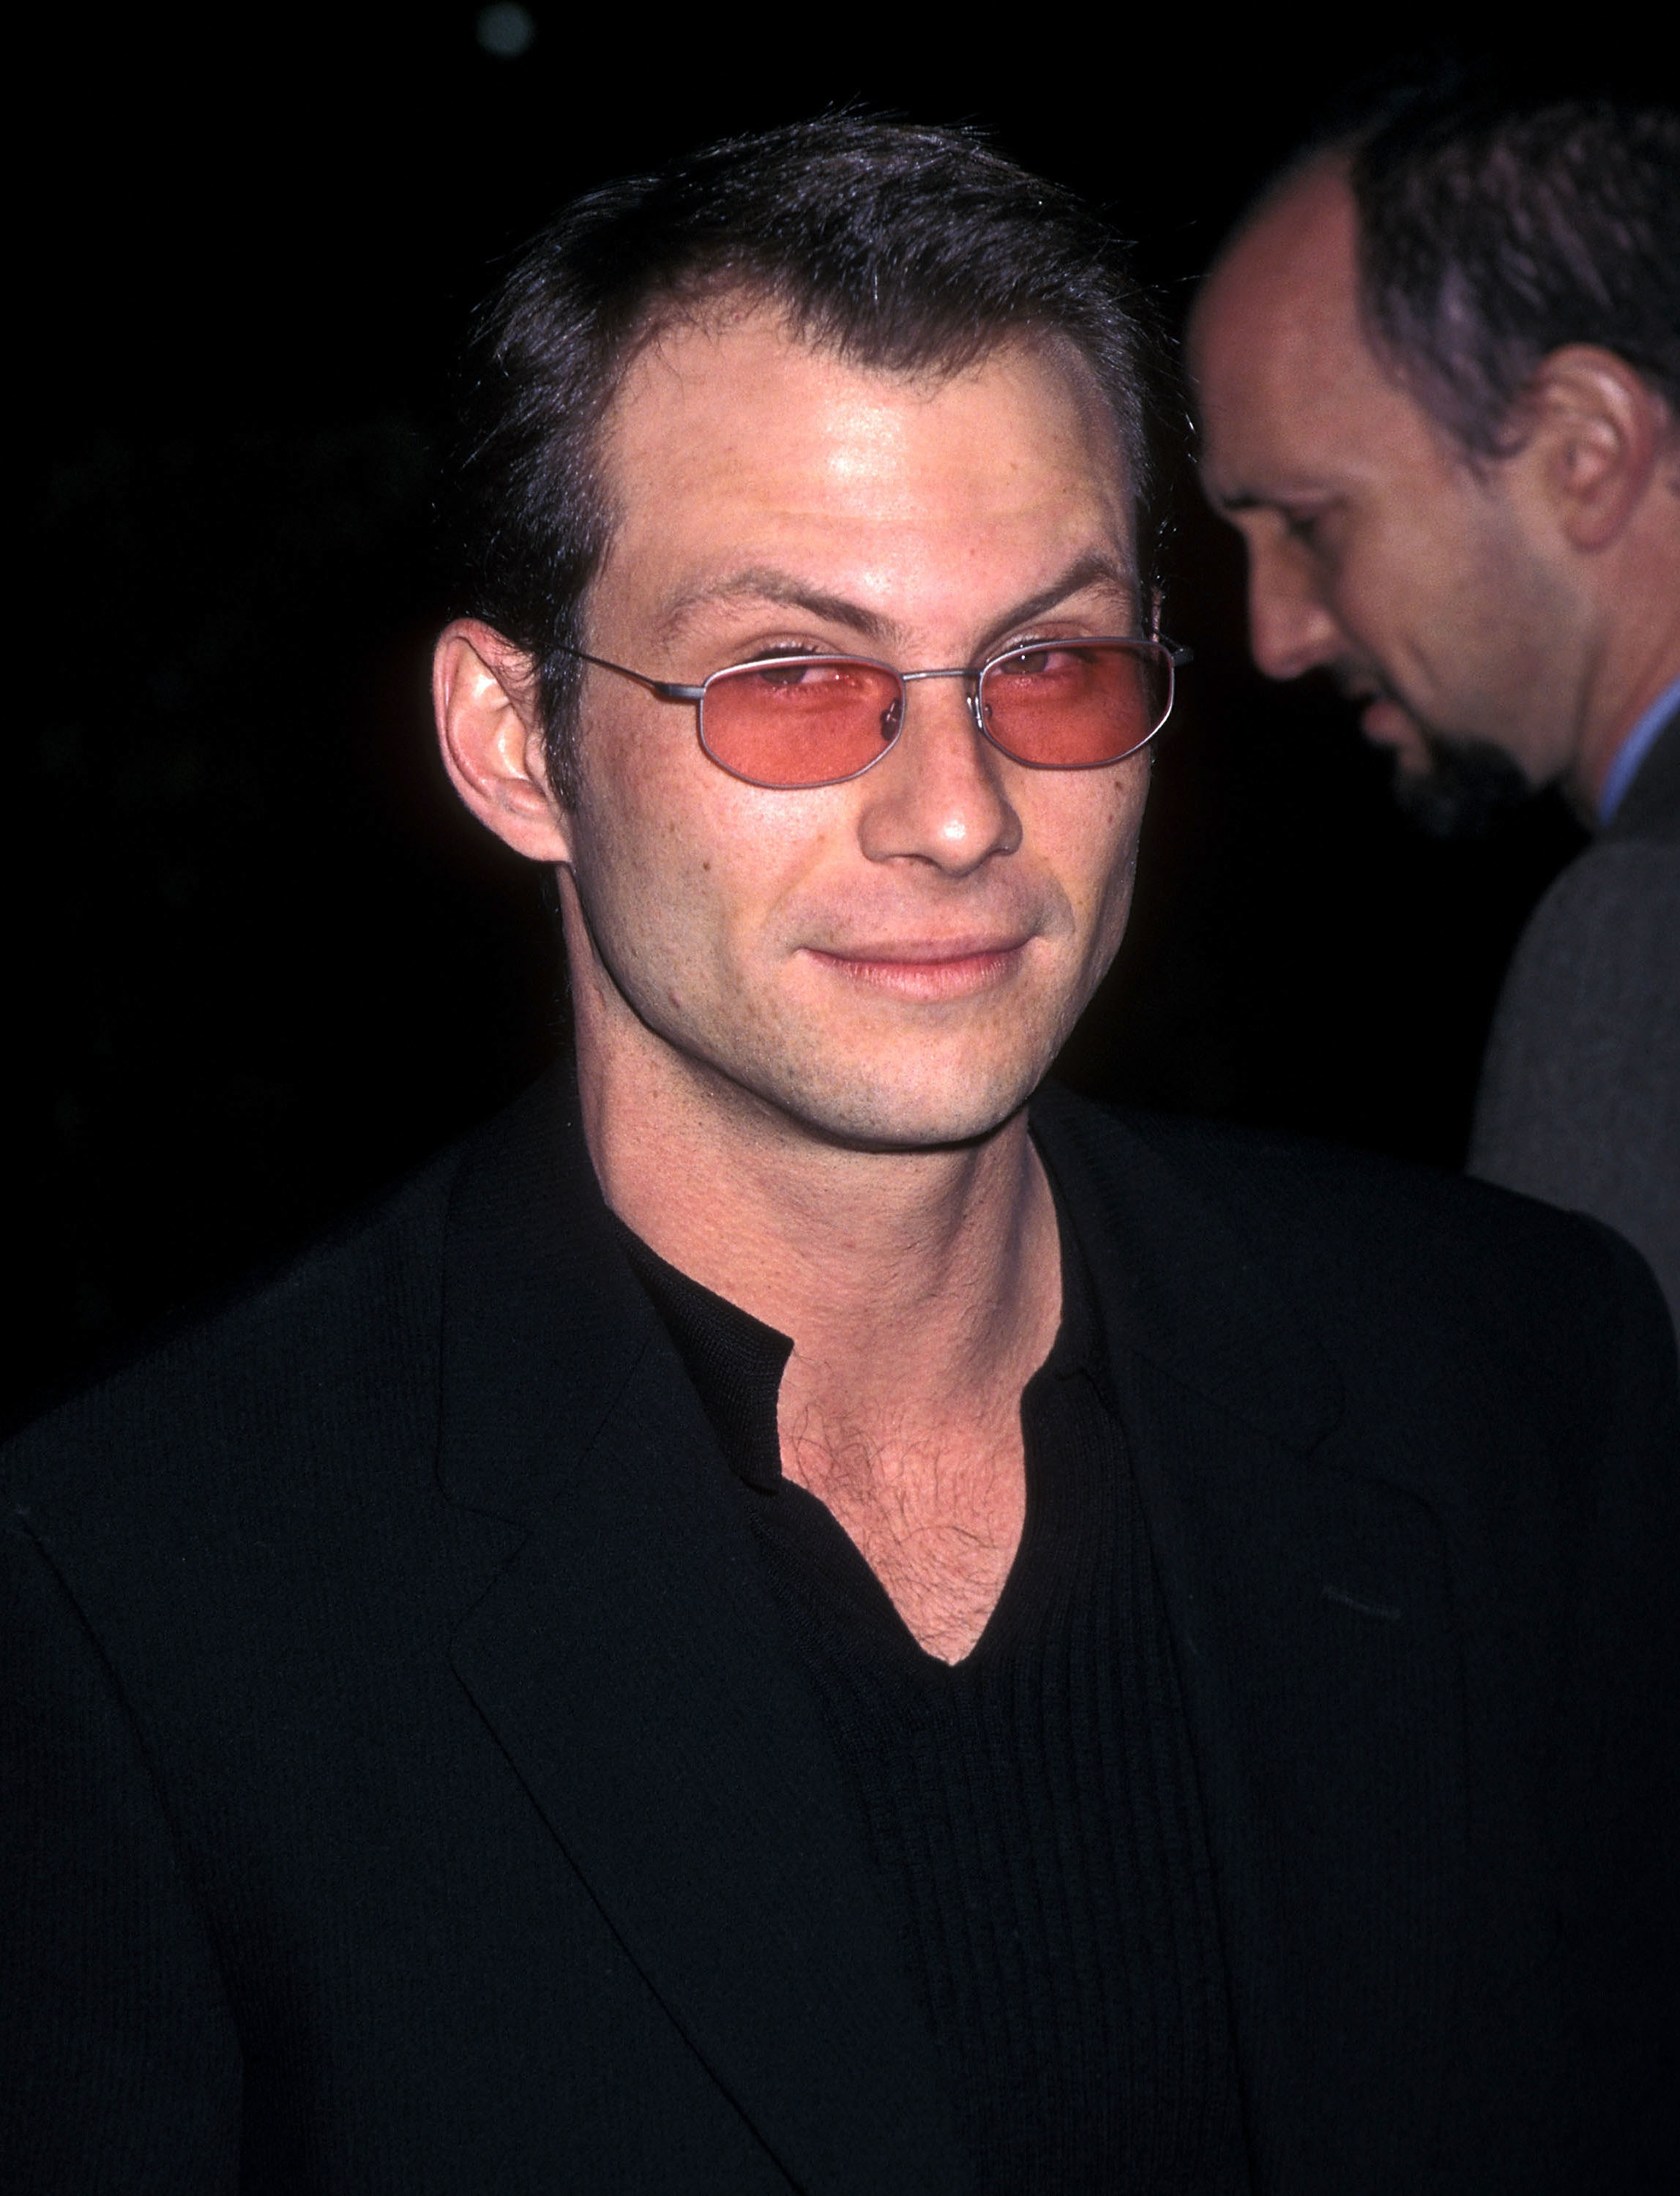 Christian Slater at &quot;Hard Rain&quot; premiere in 1998 wearing rose-colored glasses